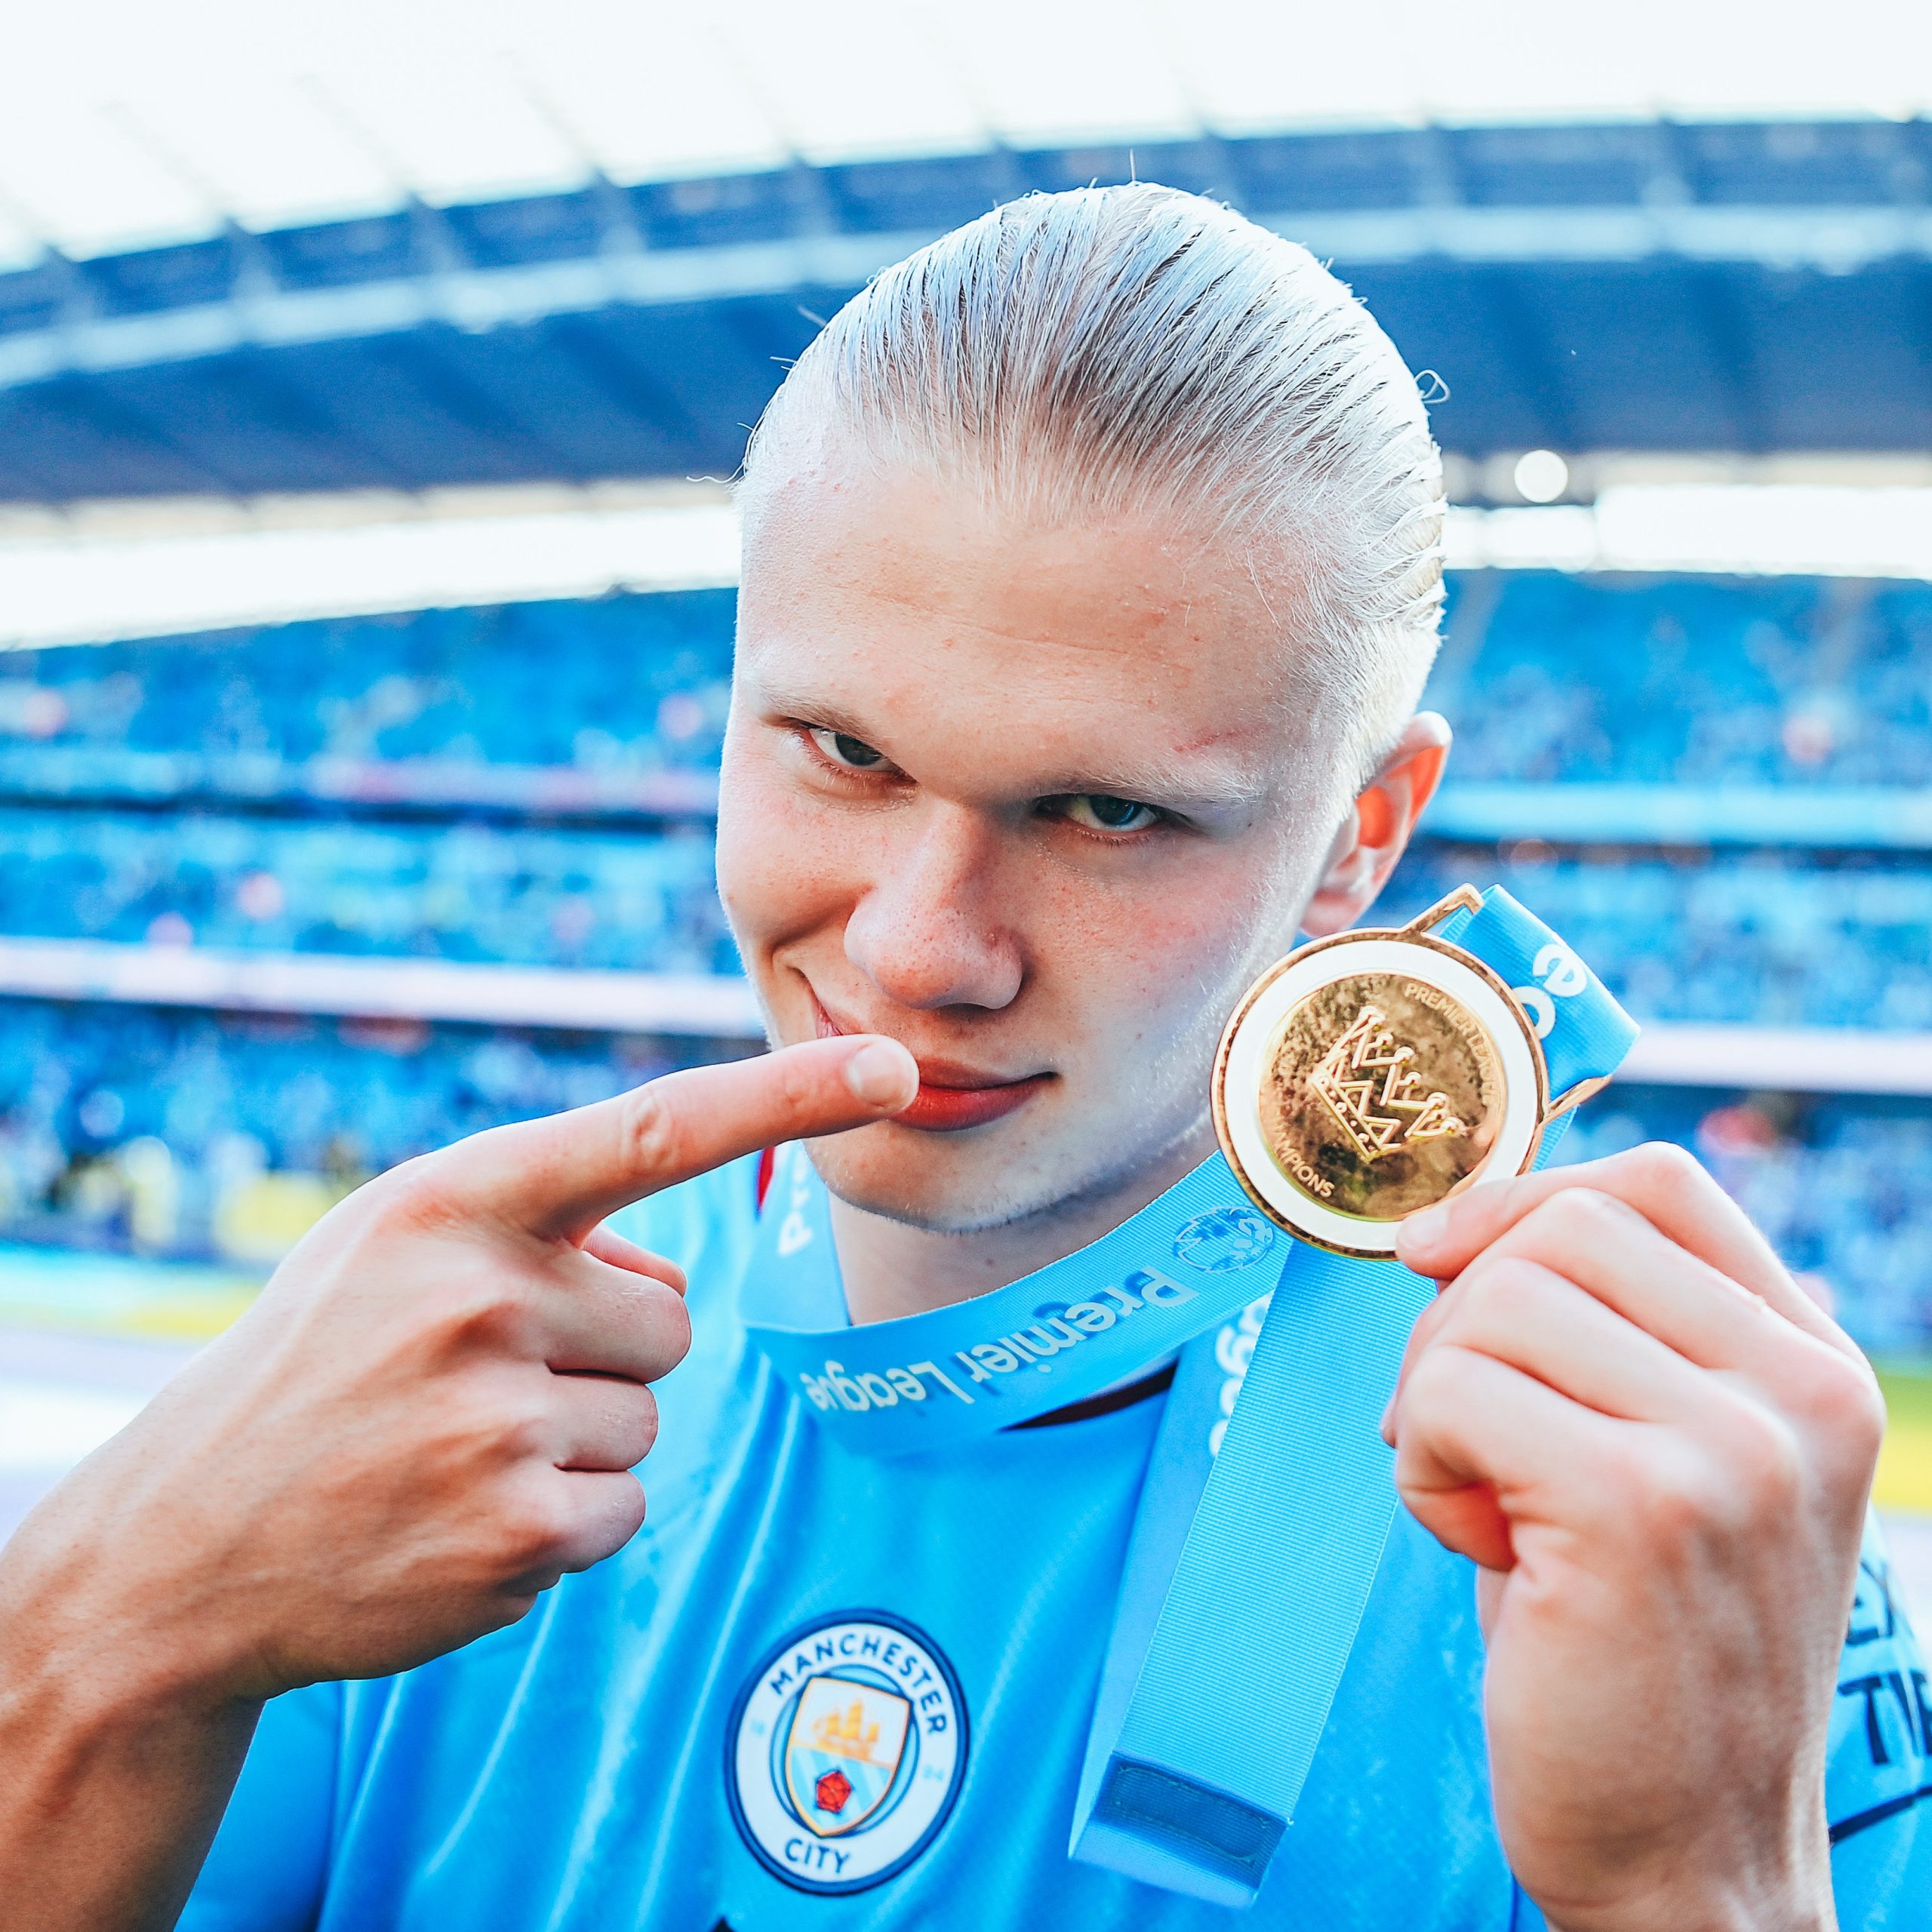 Erling Haaland shows off his Premier League medal after inspiring Manchester City to a routine league title.